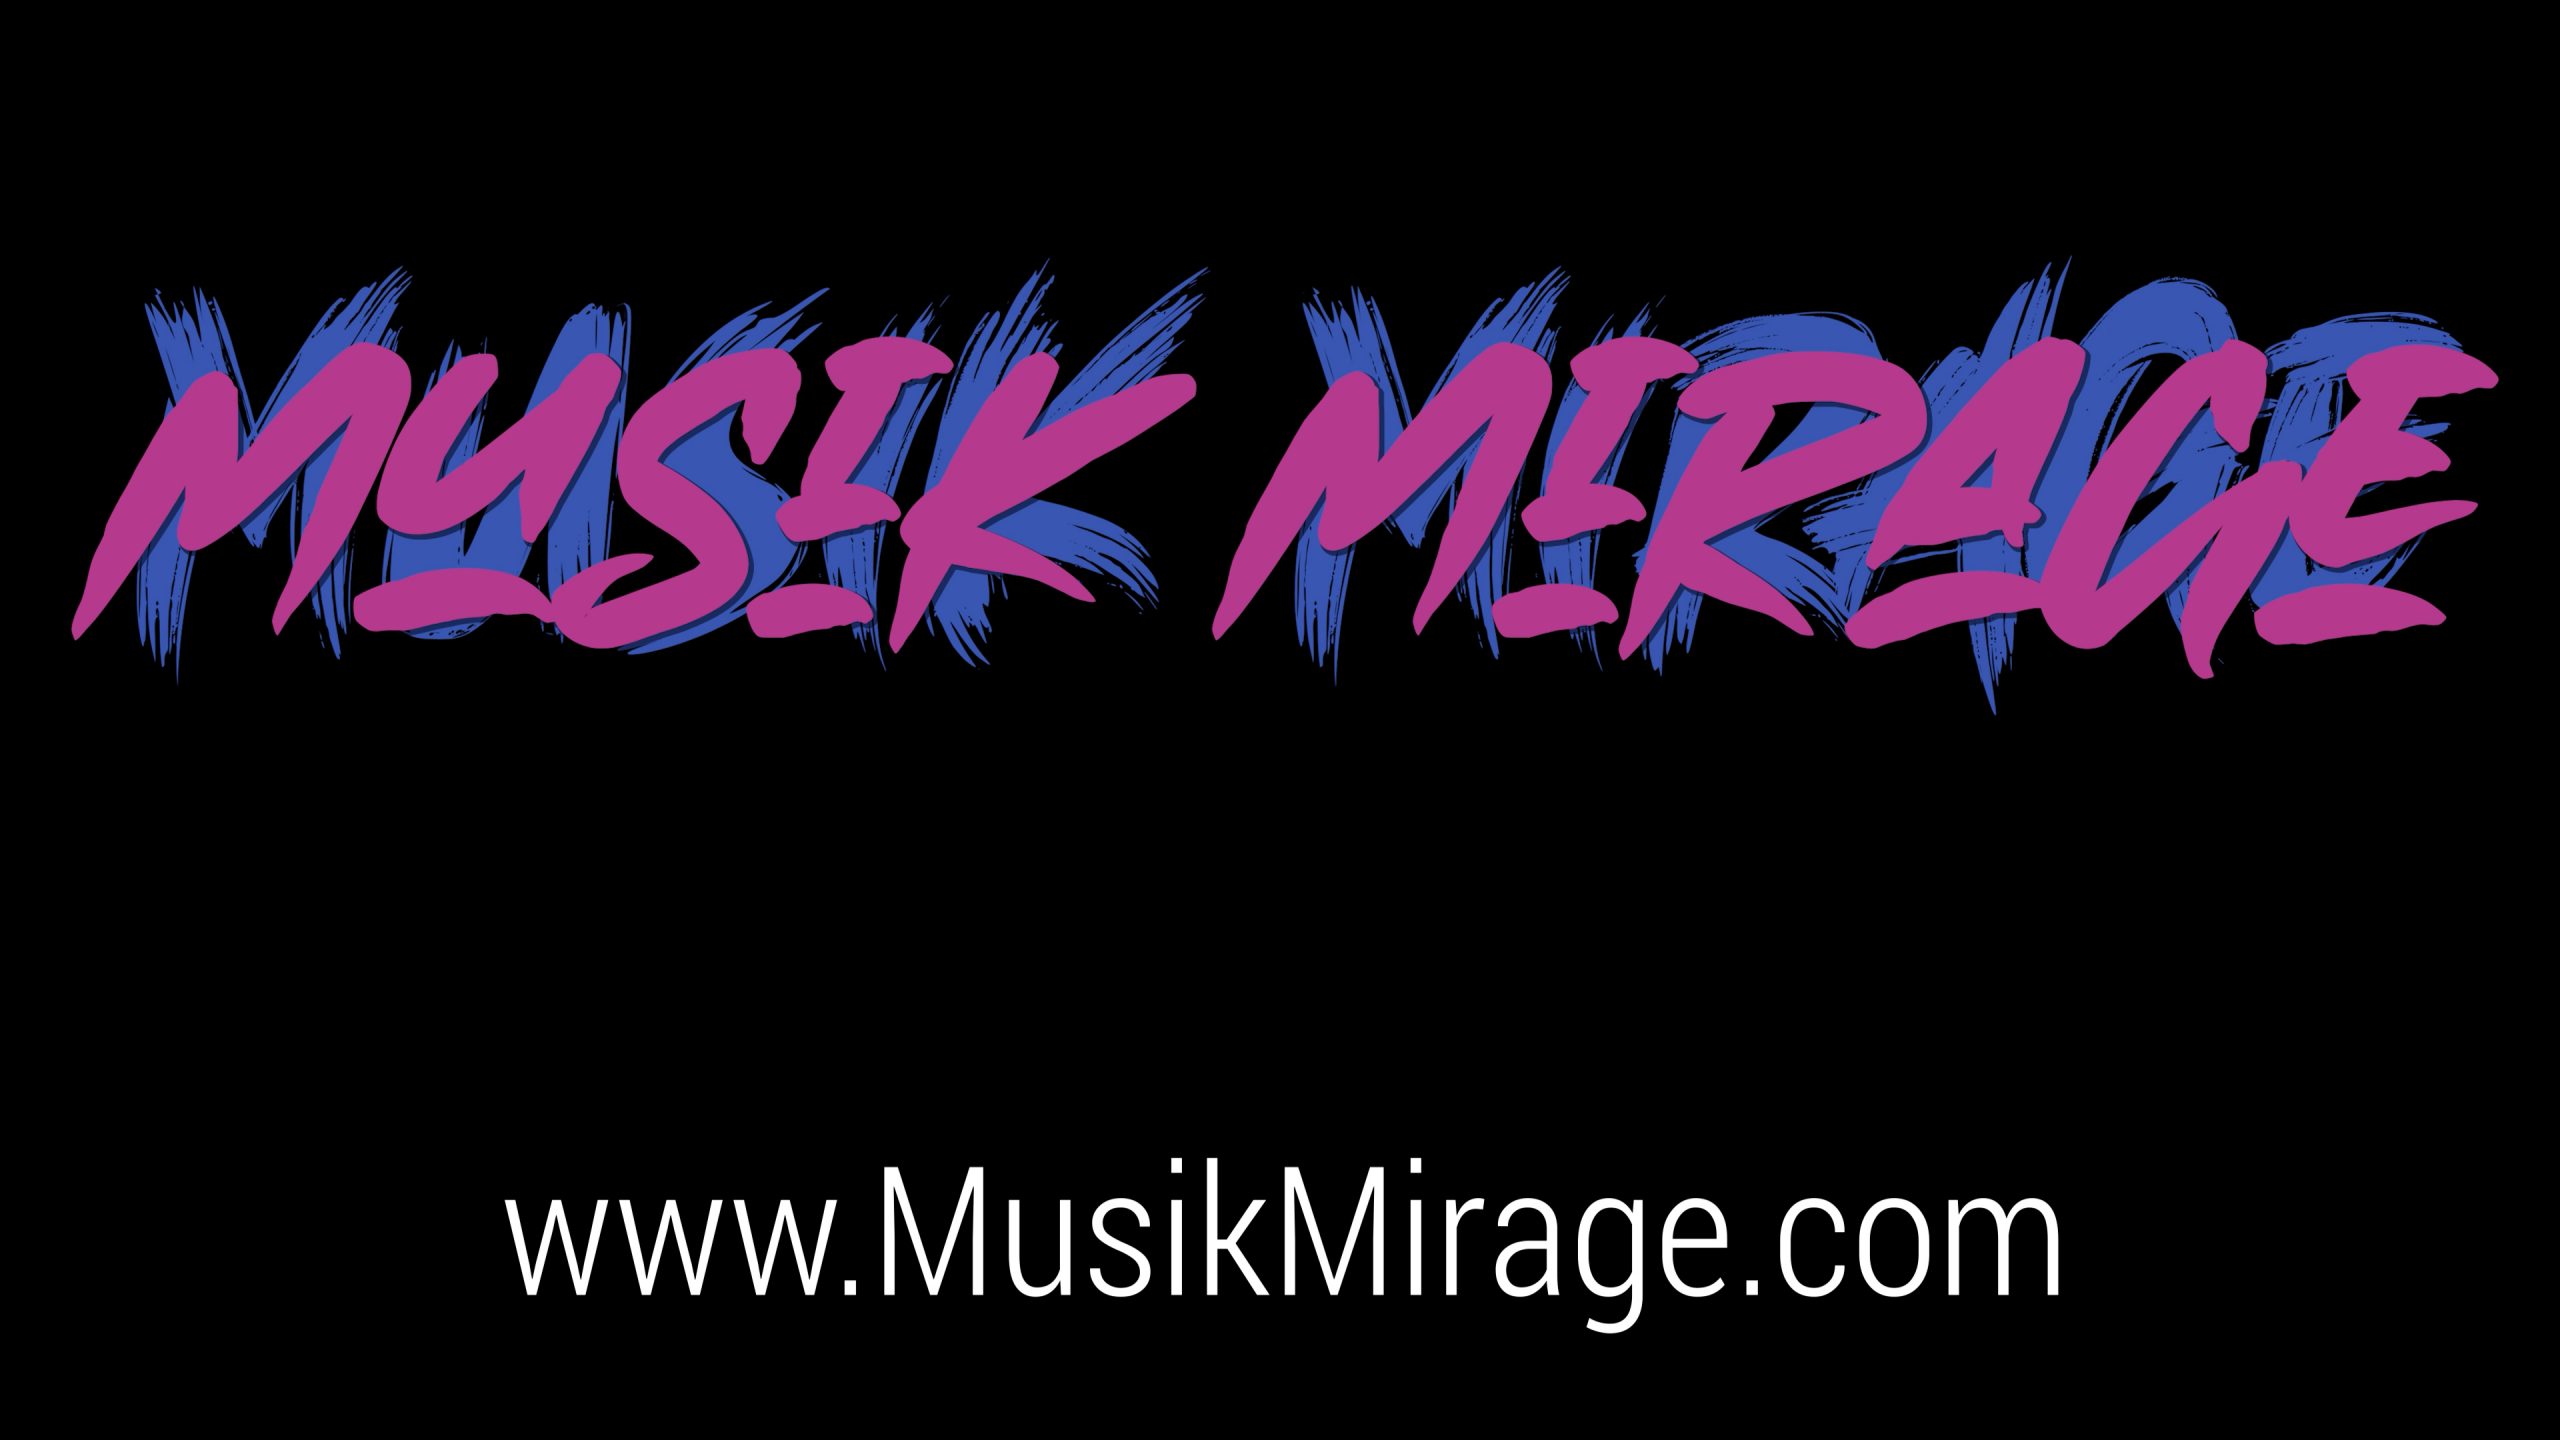 Welcome to Musik Mirage!